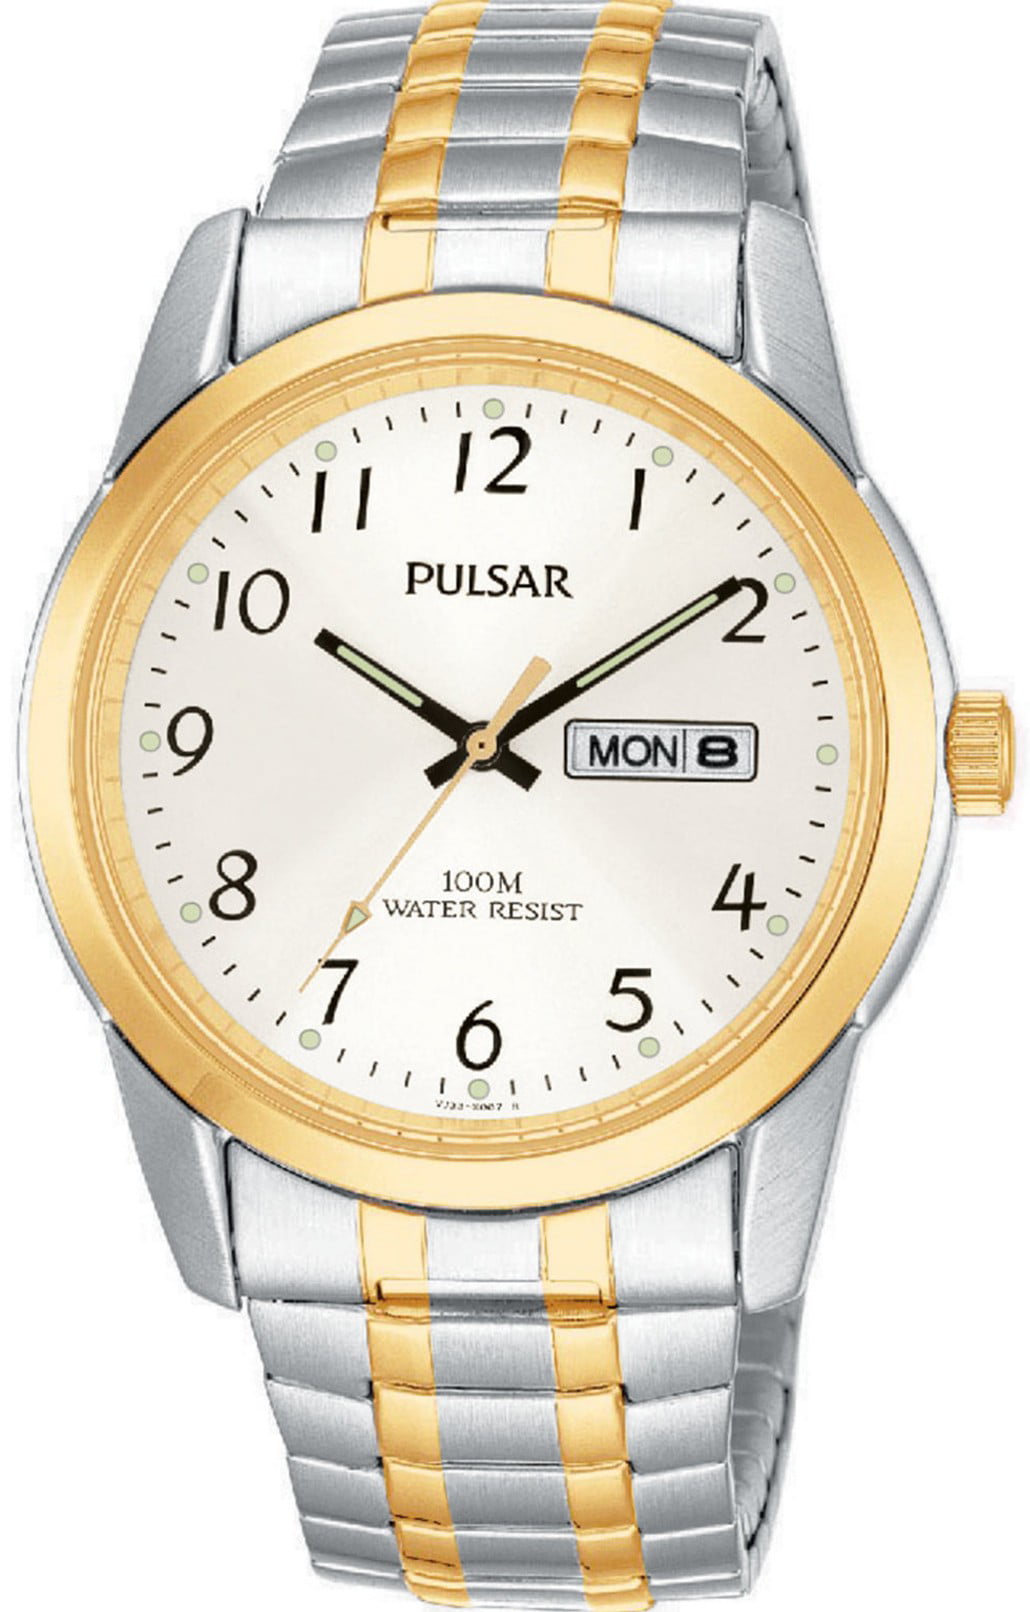 Pulsar - Men's Day/Date Watch - Gold & Stainless with Expansion Band